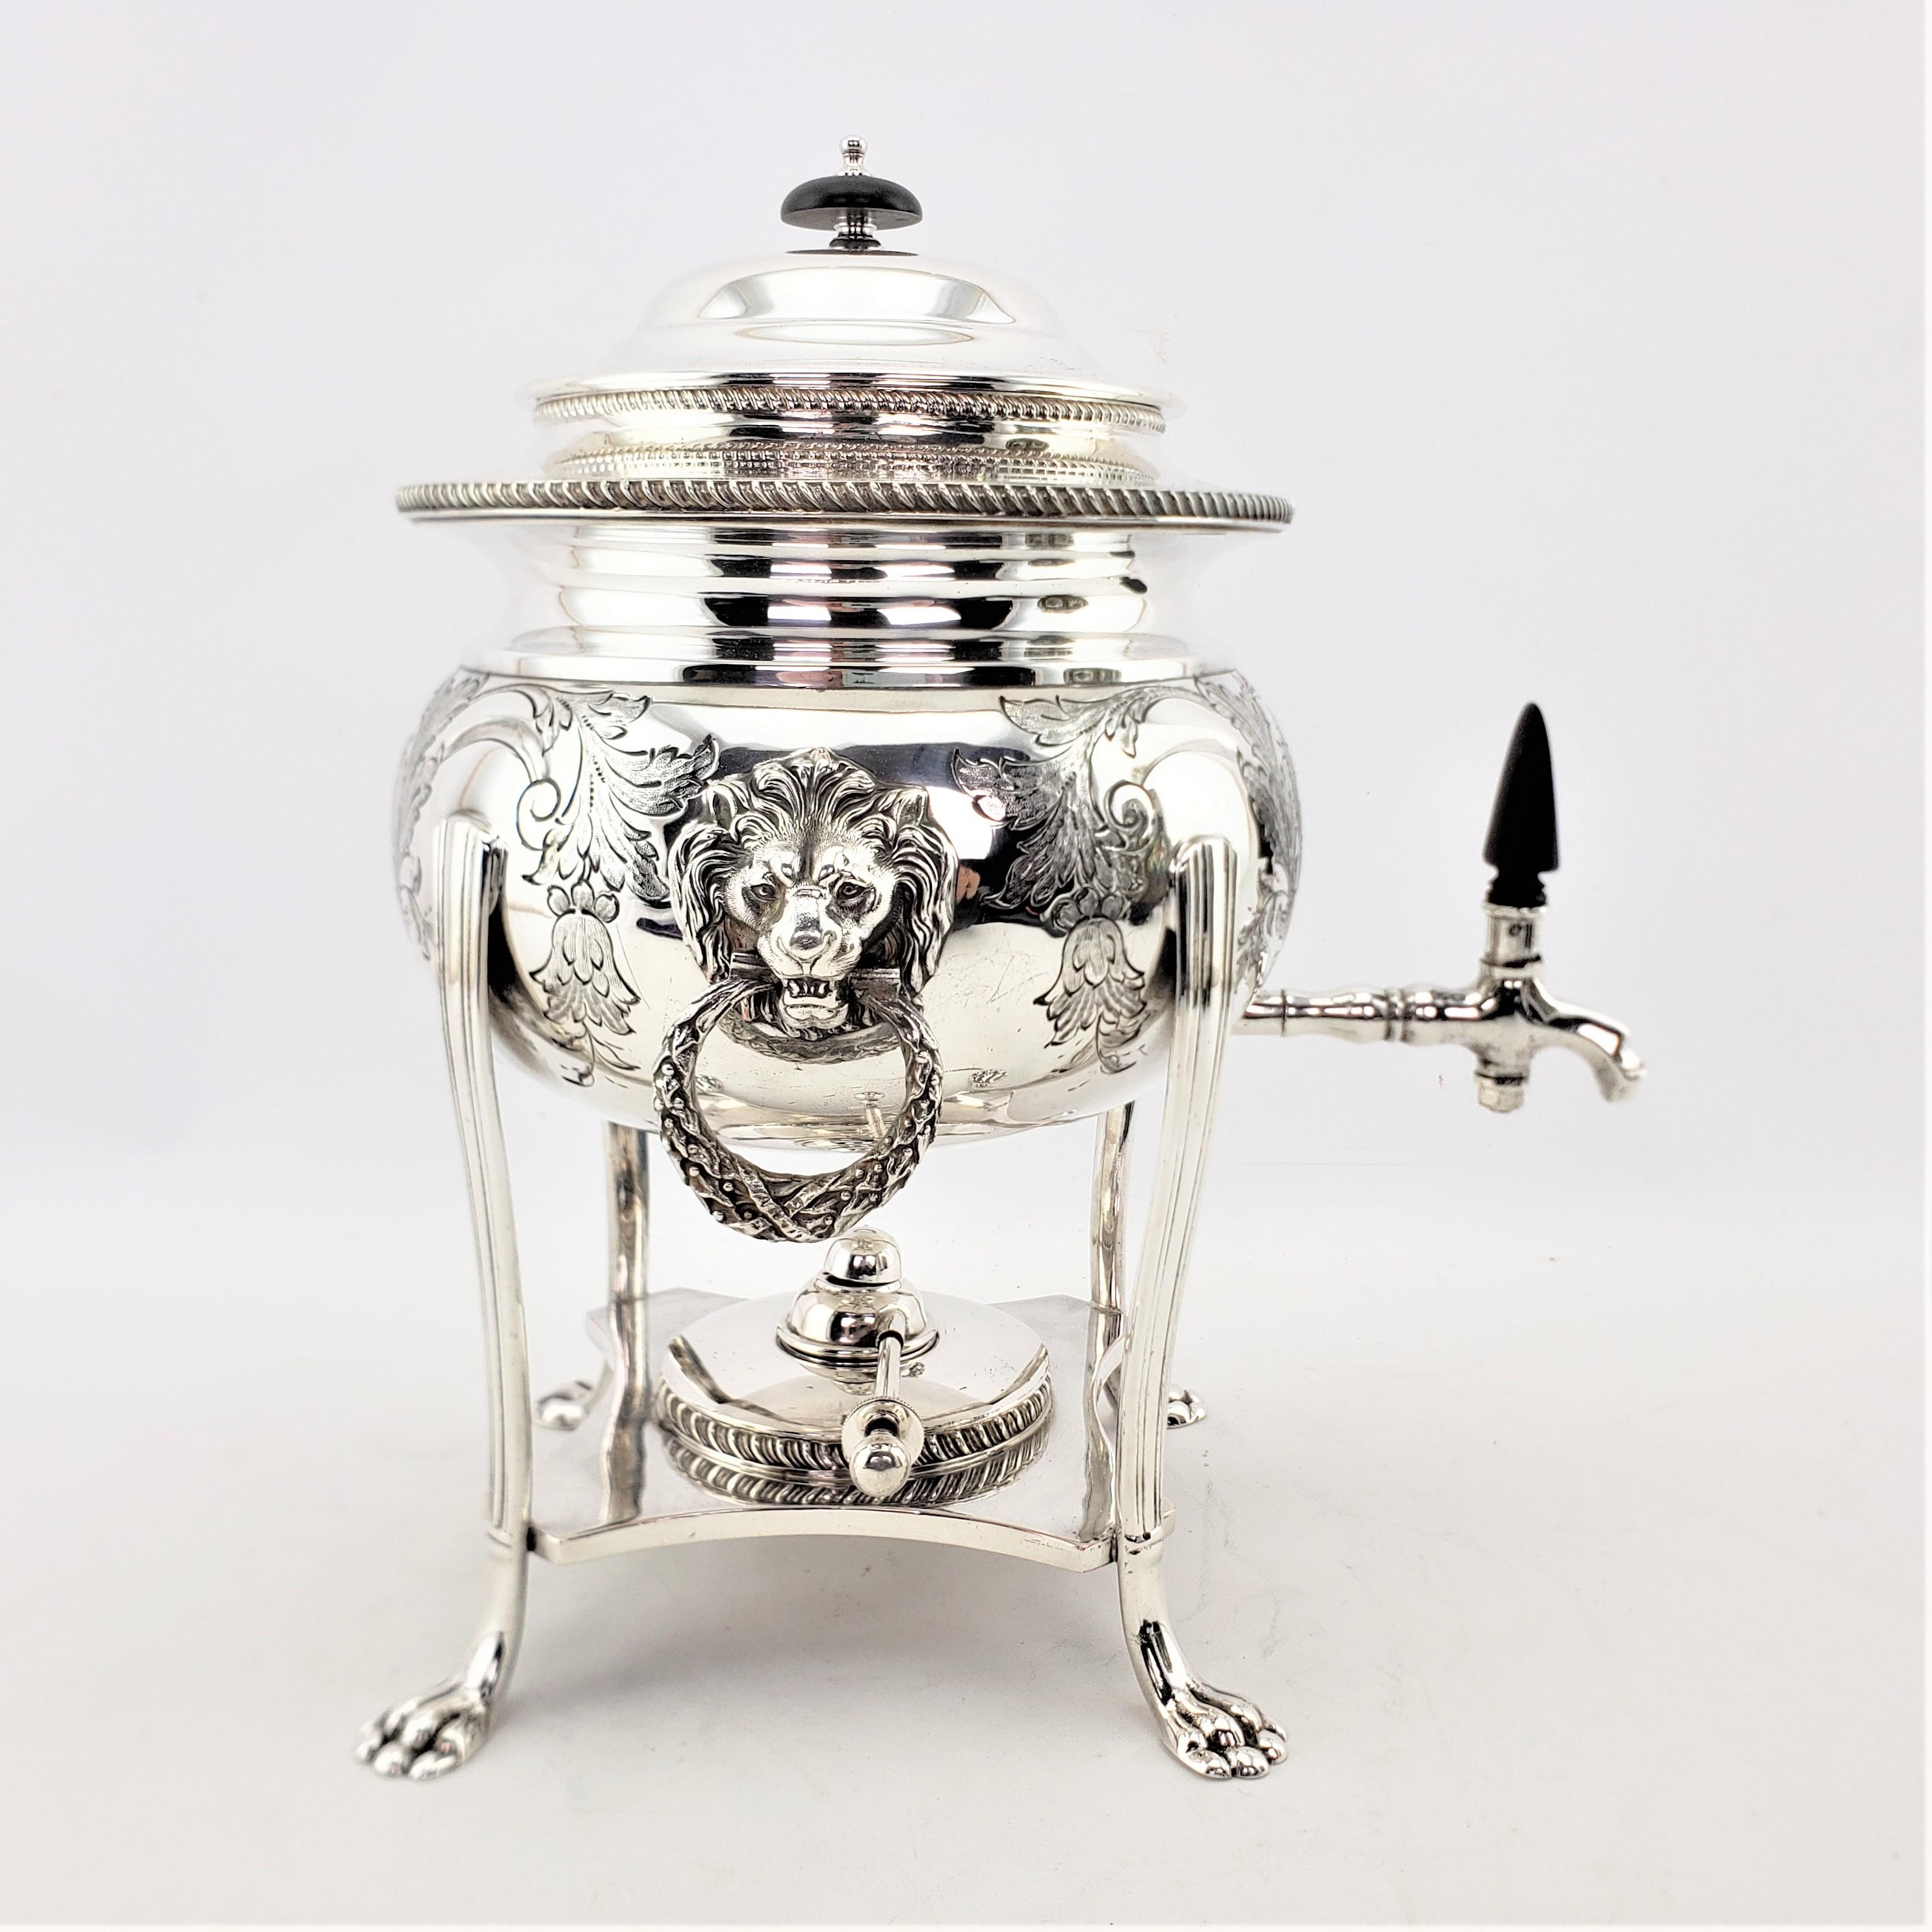 Antique English Silver Plated Tea or Hot Water Urn with Lion Mounts & Engraving 2